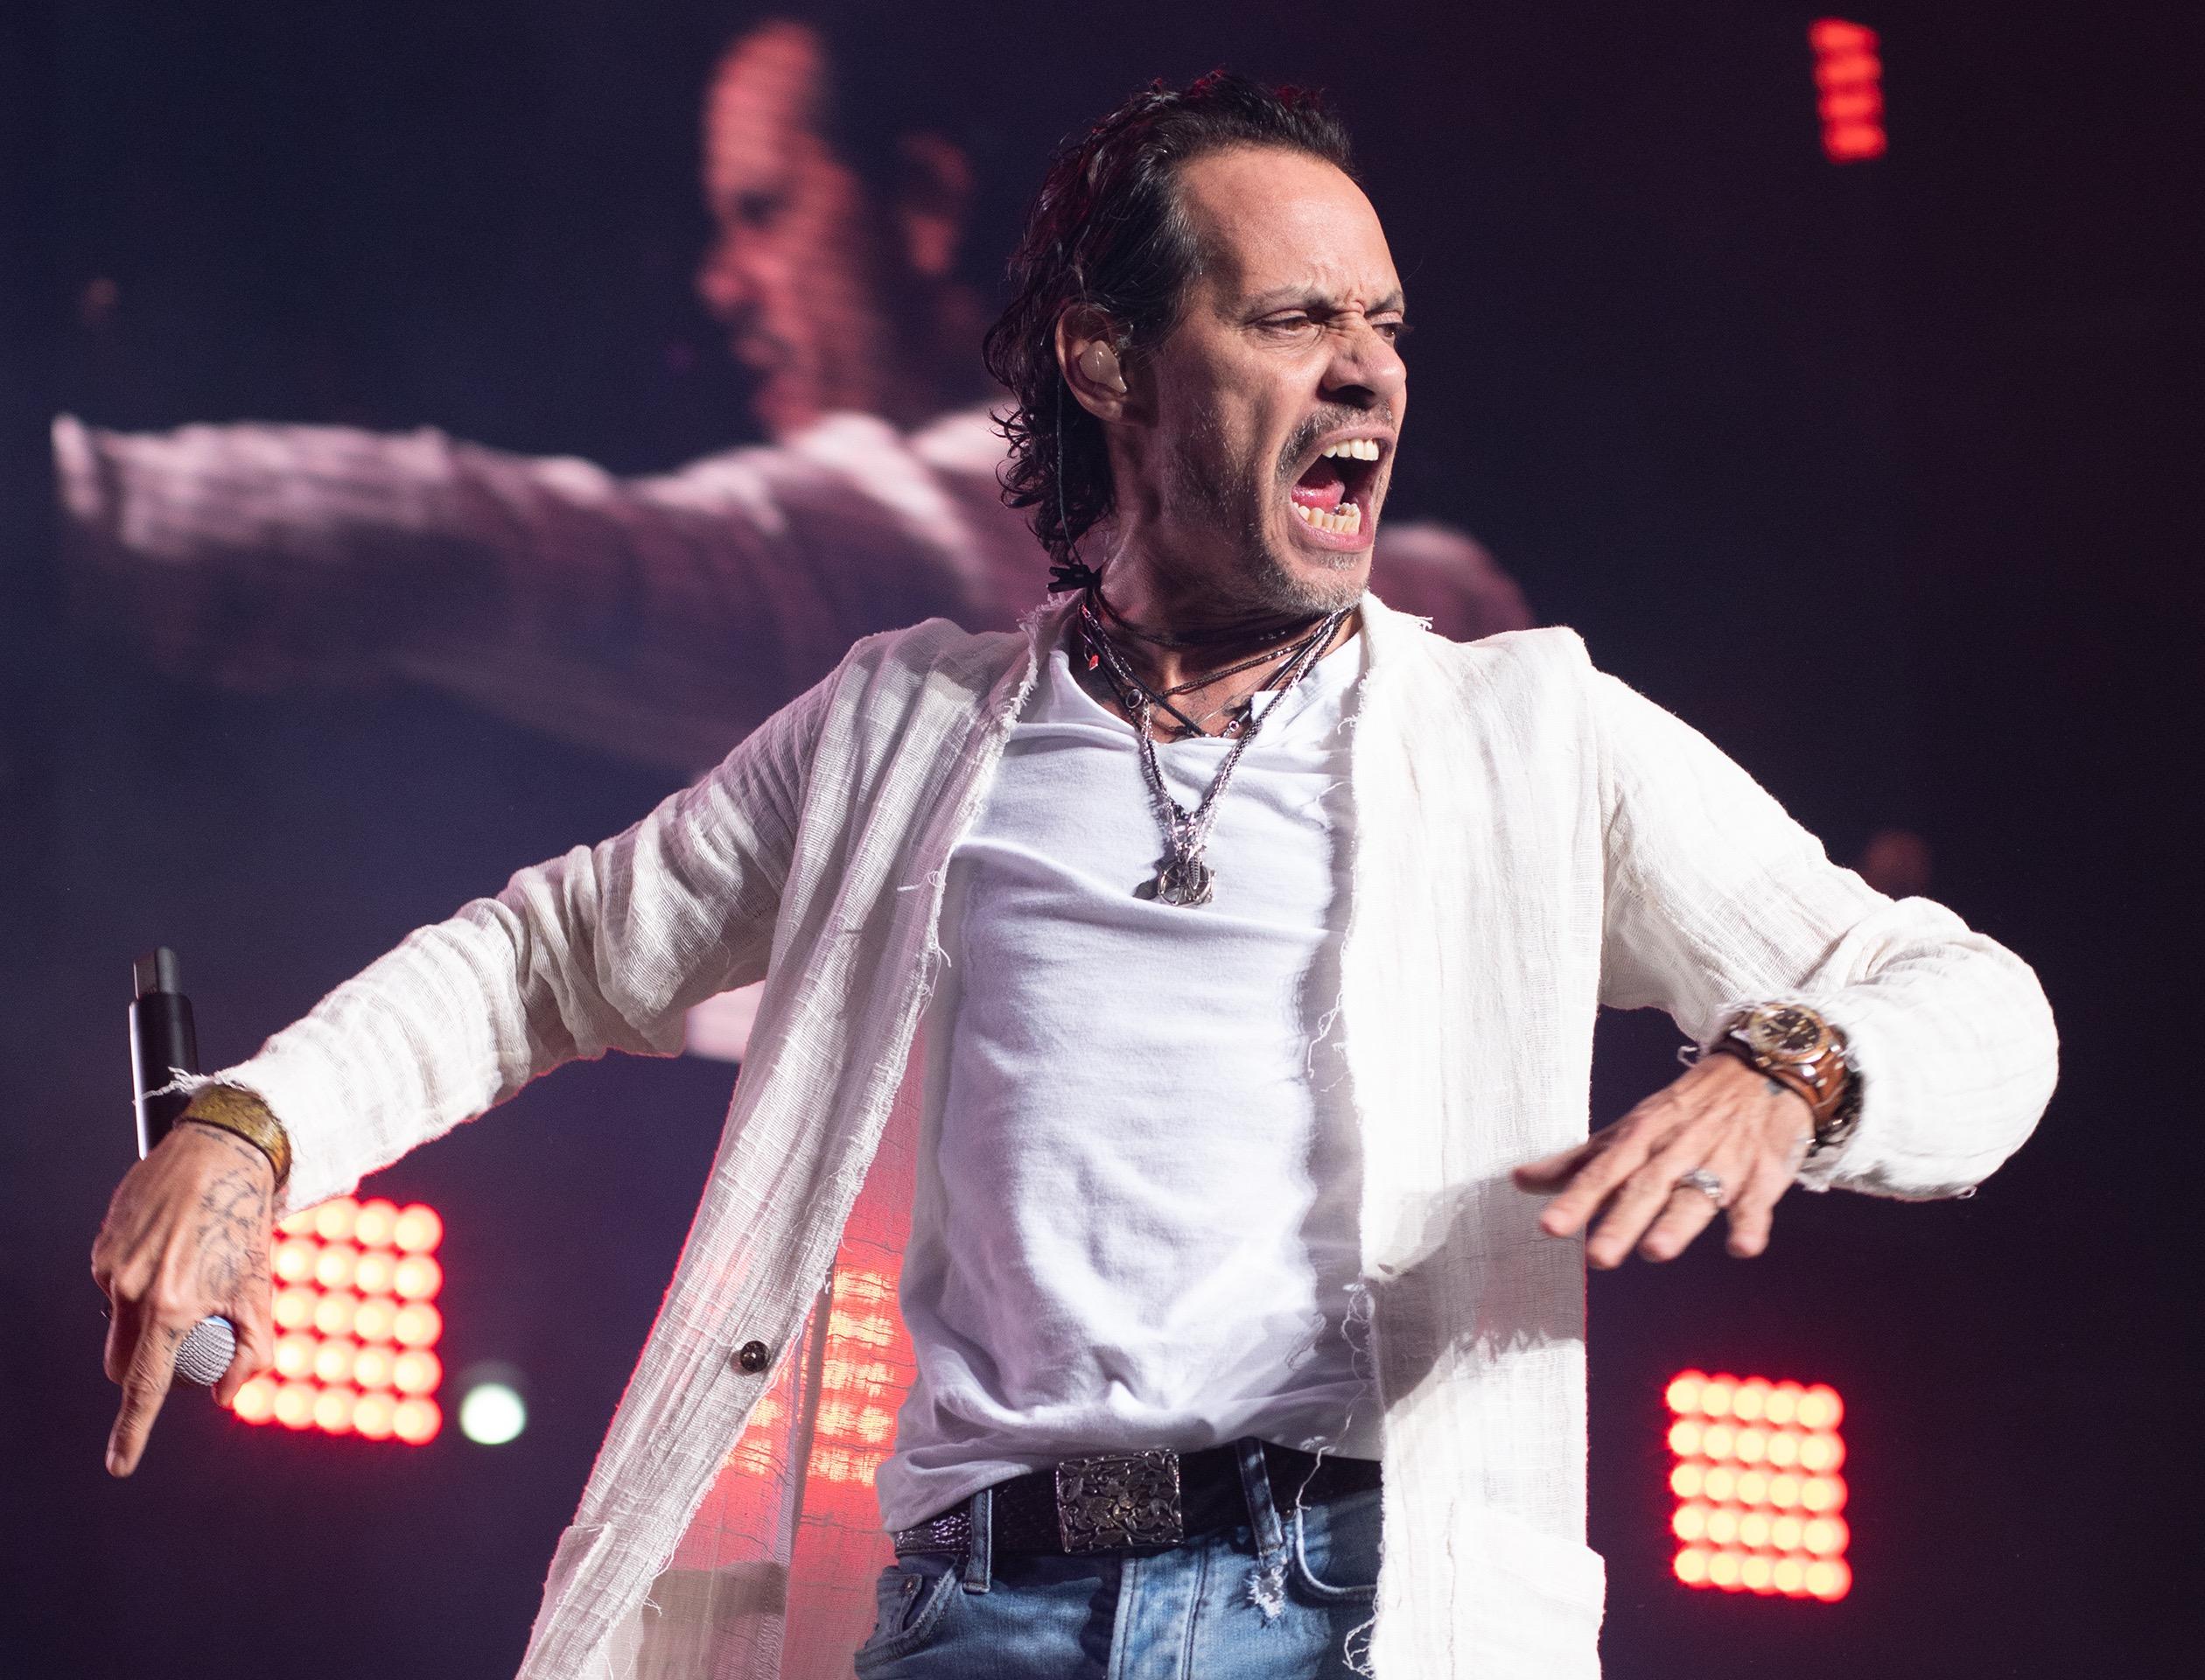 Marc Anthony Opus Tour 2020 Madison Square Garden, NY. 13 Feb 2020 Pictured: Marc Anthony.